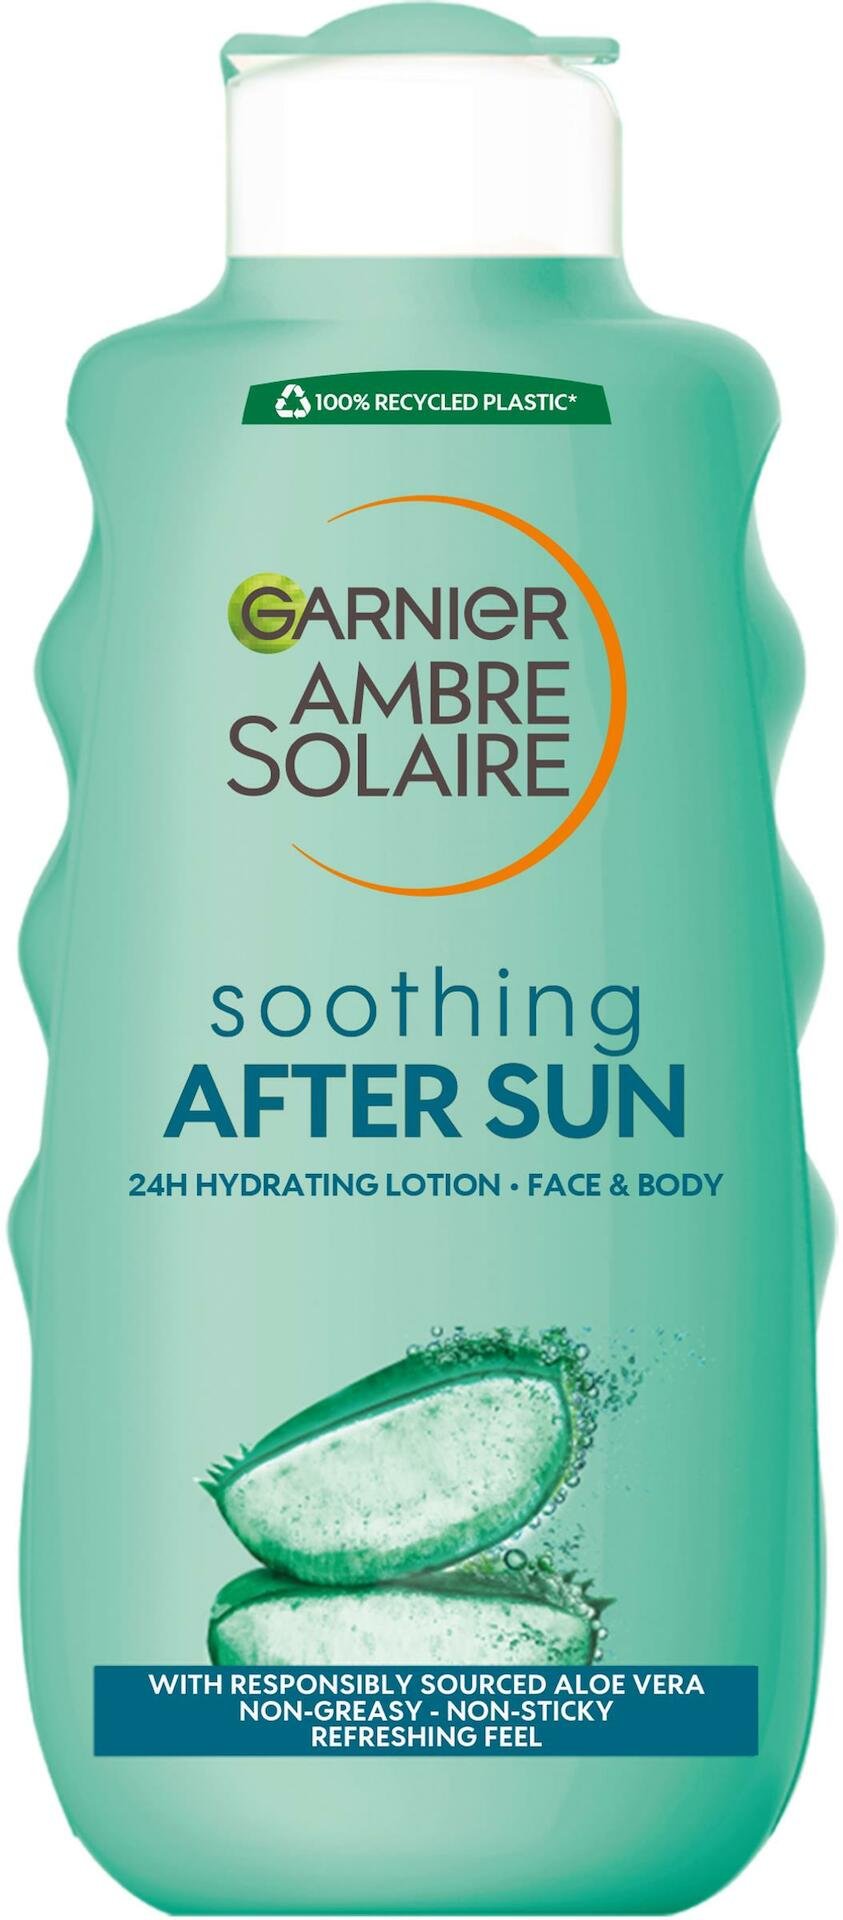 Garnier Ambre Solaire After Sun 24H Hydrating Face & Body Lotion 200 ml